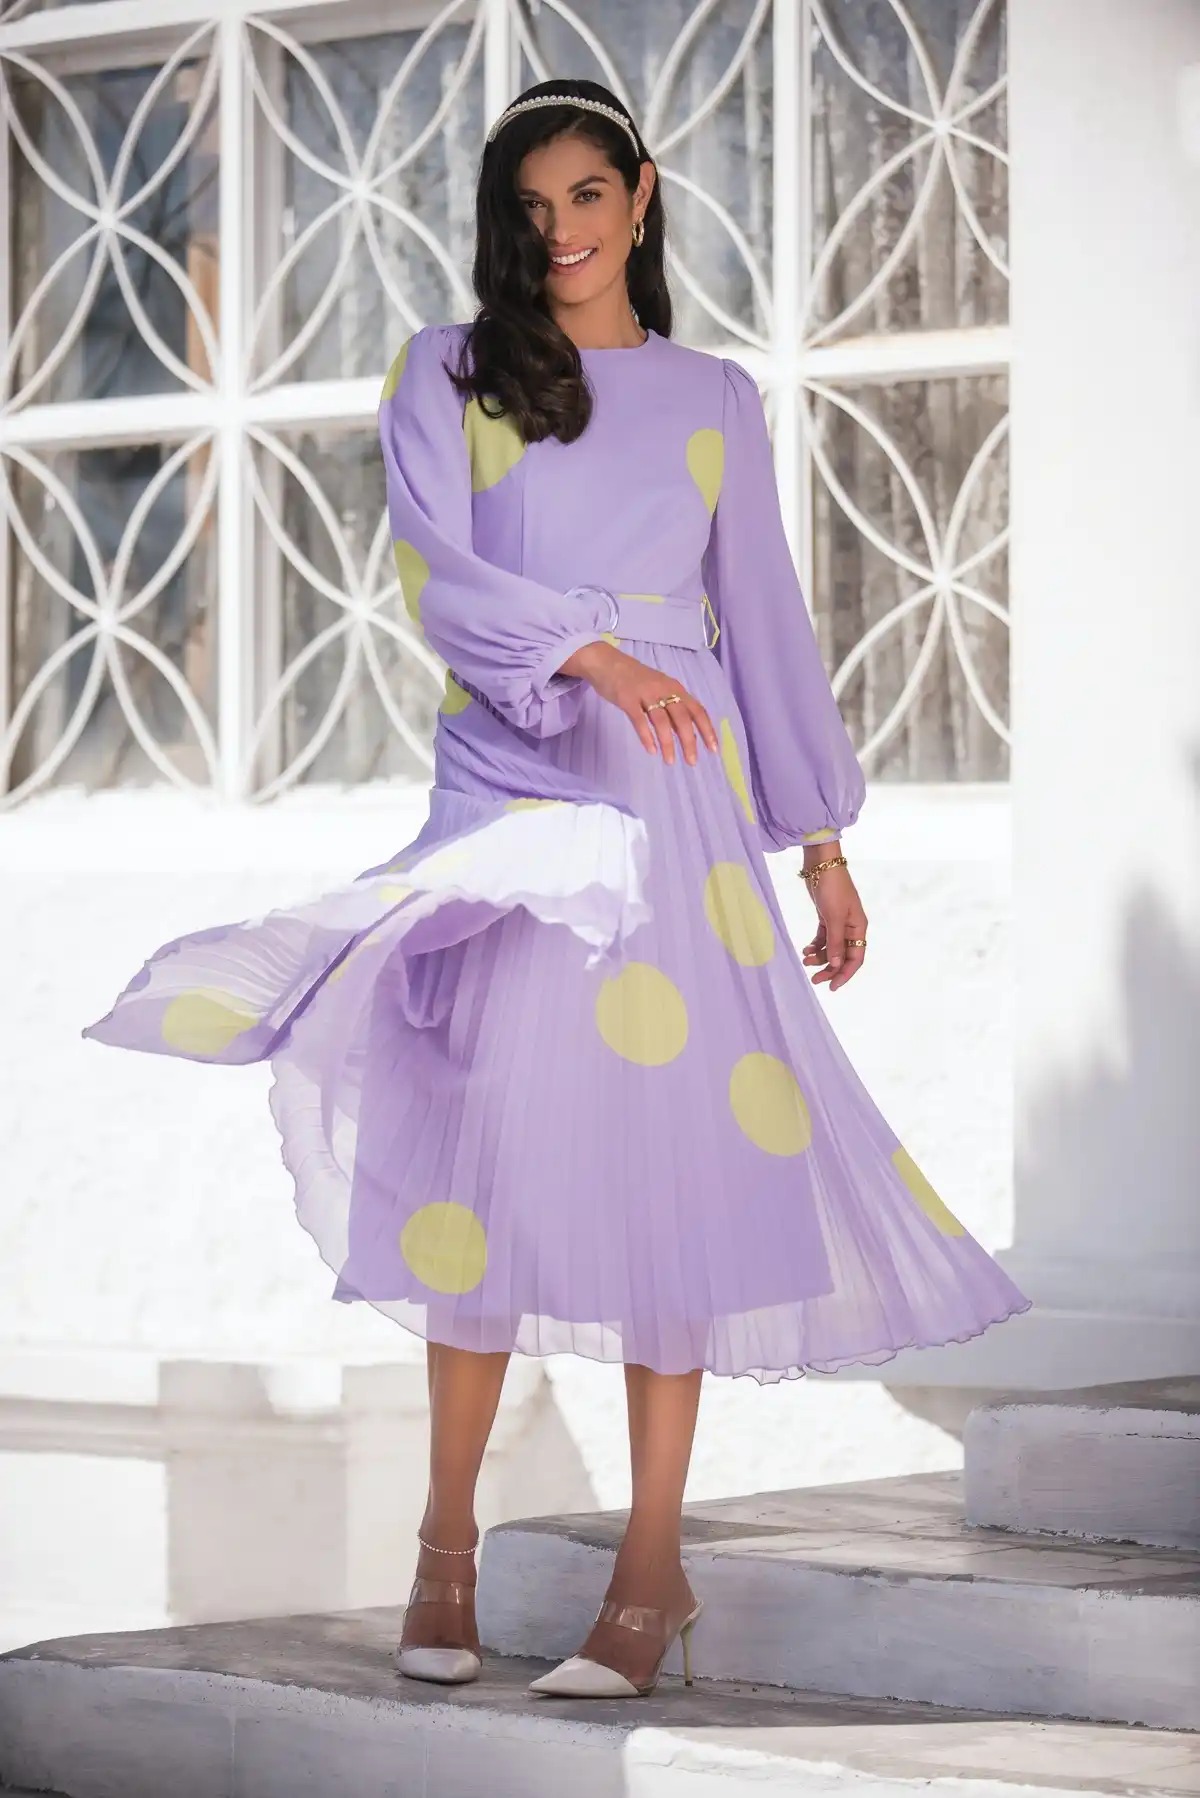 light purple dress with yellow dots and white heels